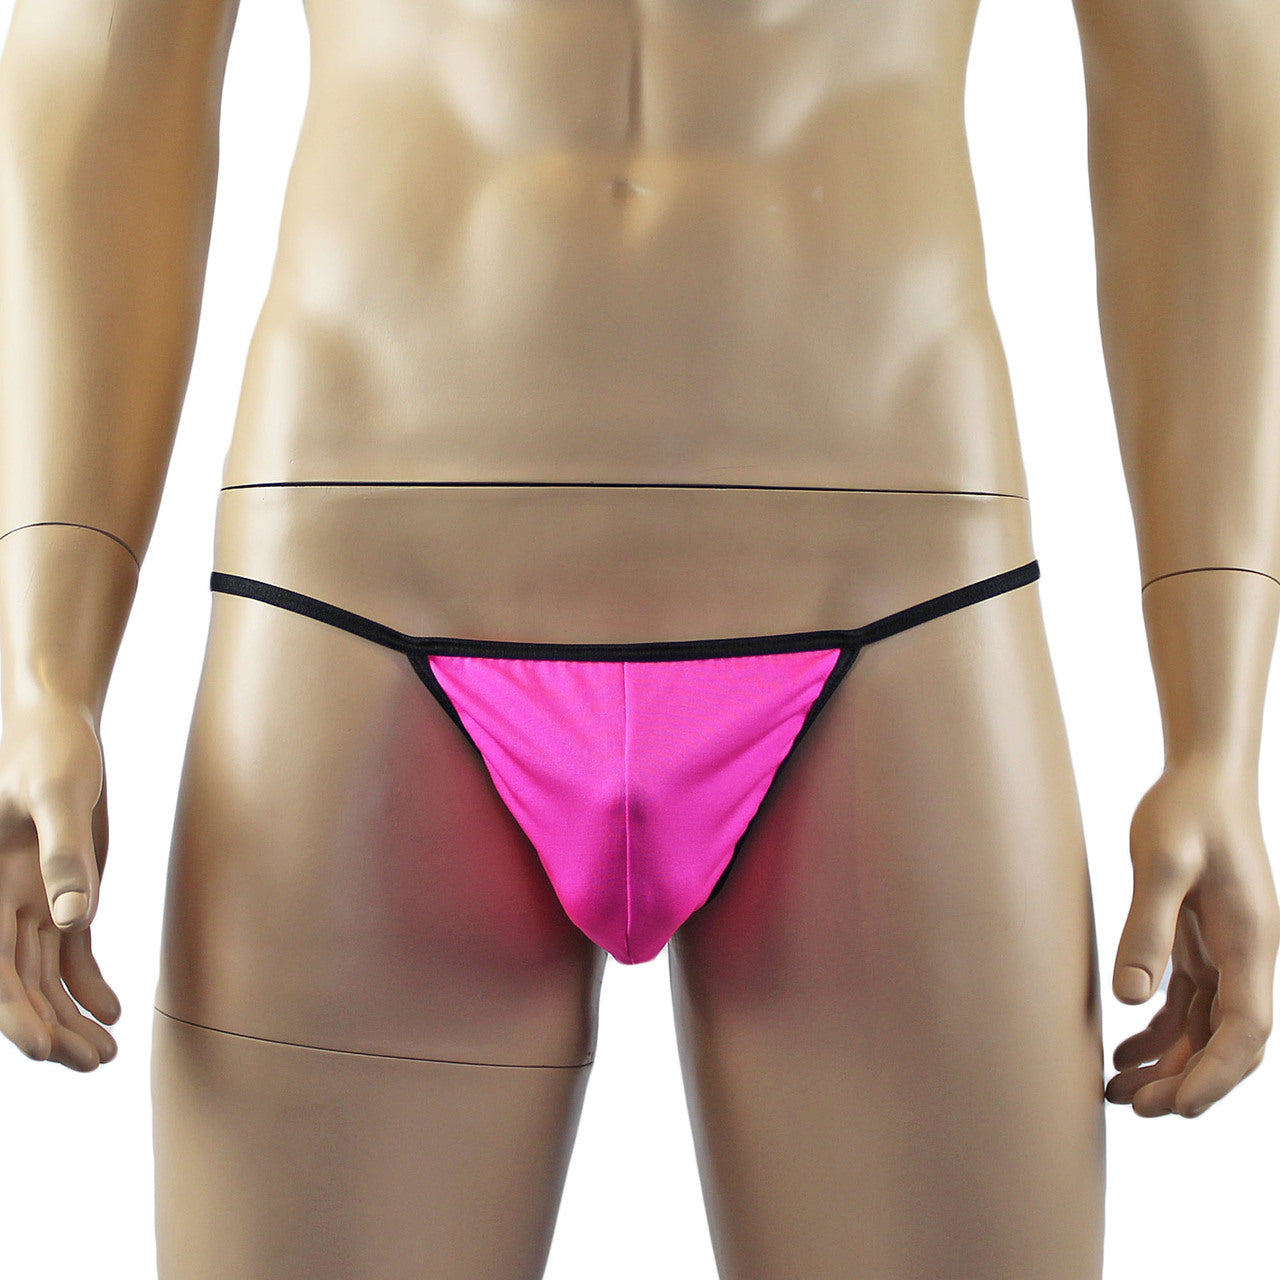 Mens Lingerie Pouch G string with Triangle Back & Bow (hot pink plus other colours)